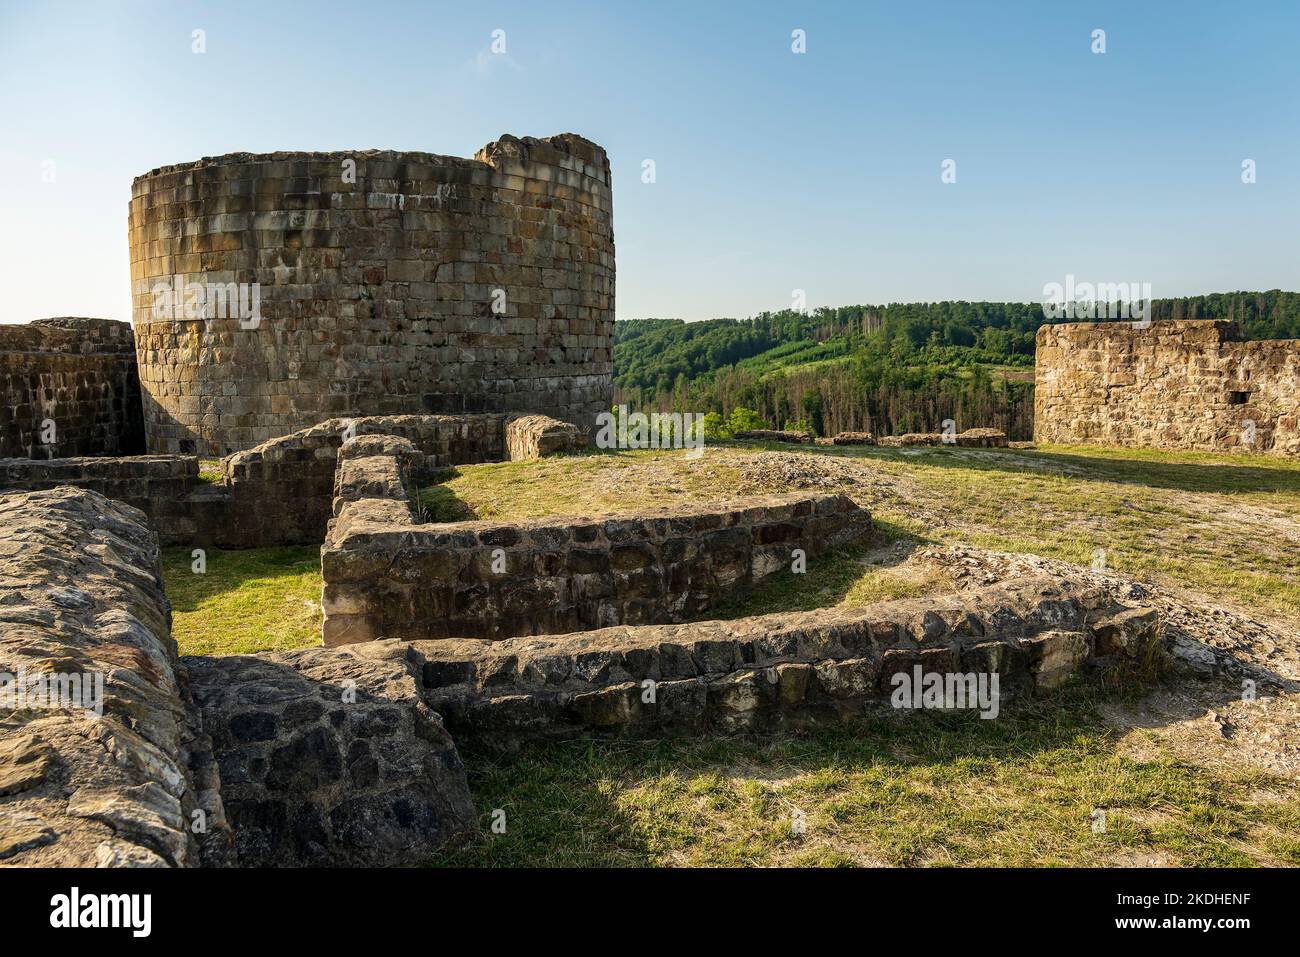 Ruins of castle Falkenburg, a hill castle from the 12th century, near Detmold, Teutoburg Forest, Germany Stock Photo